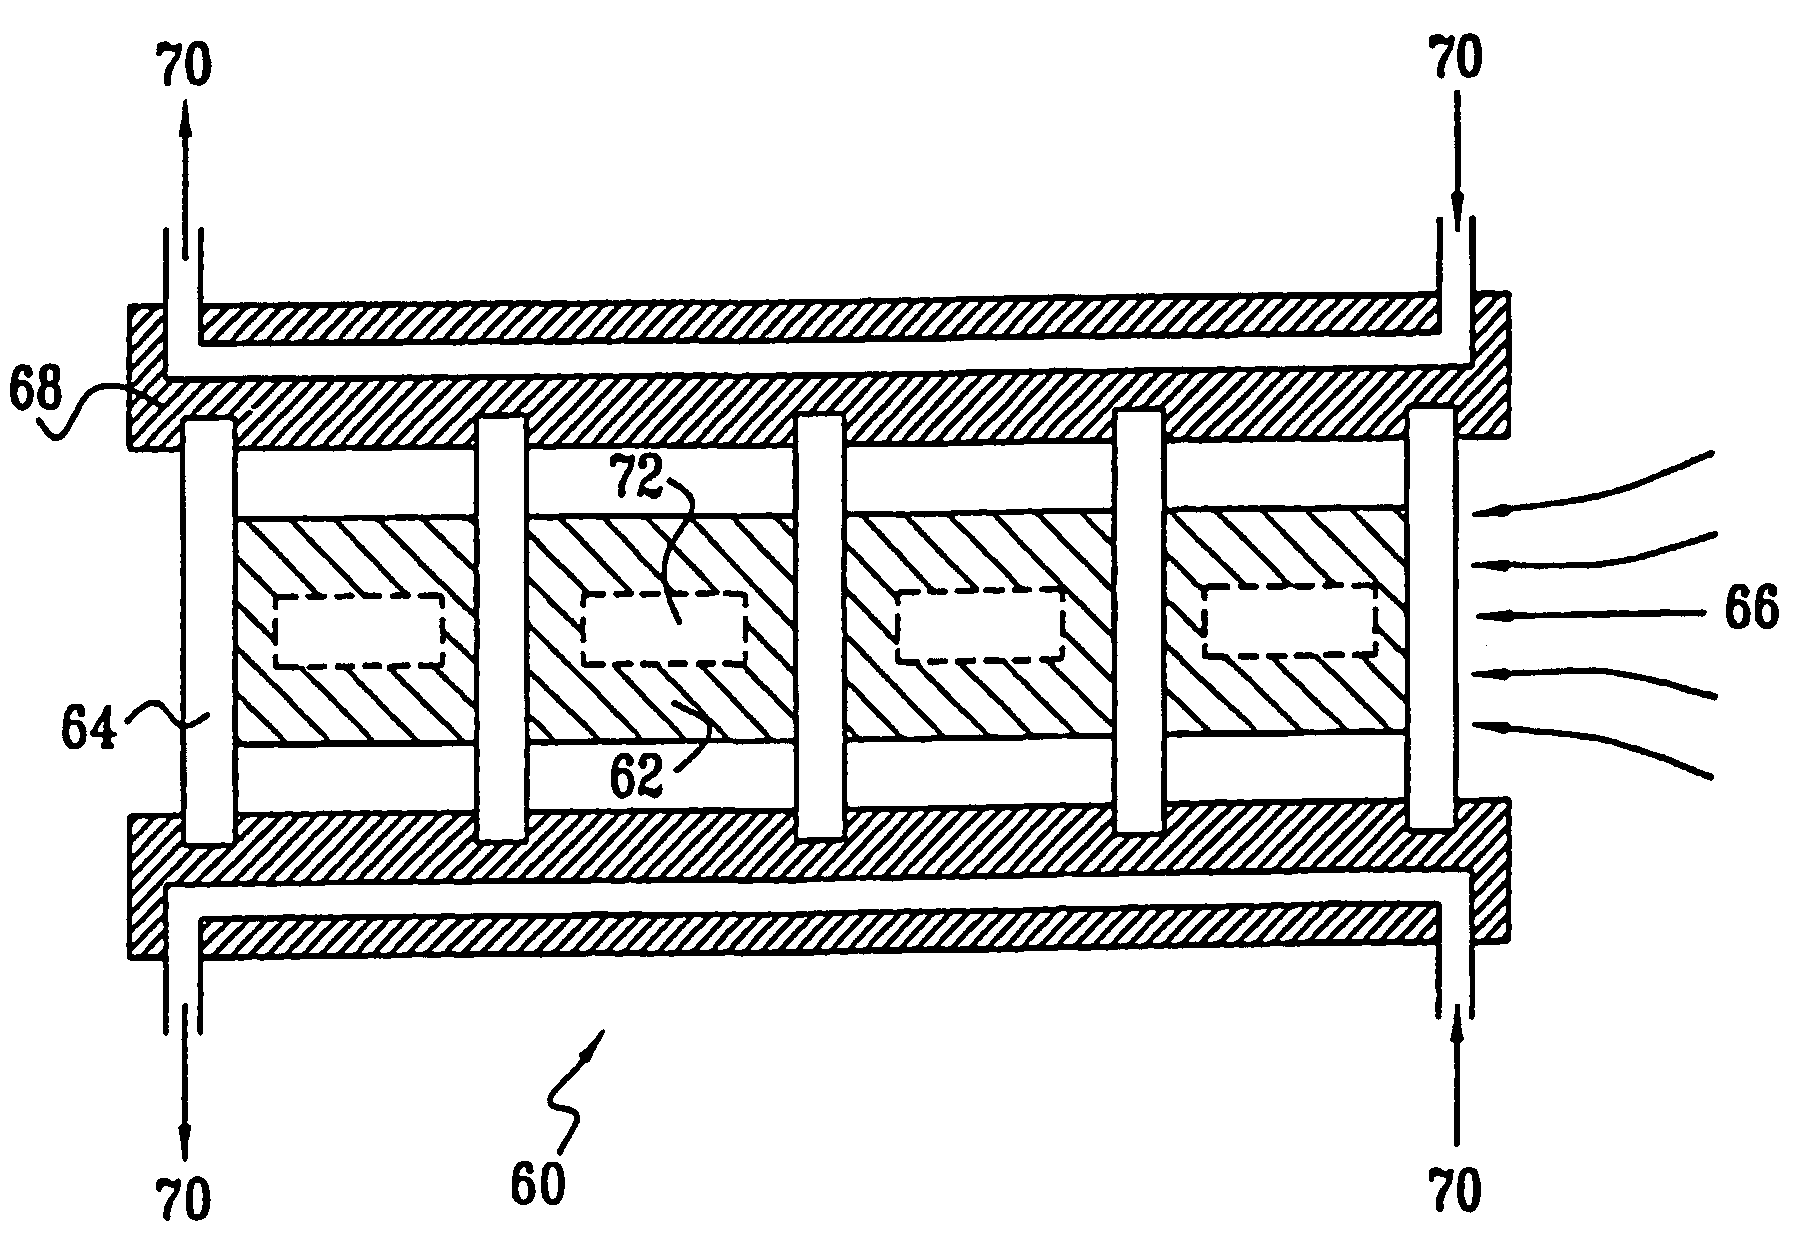 Diamond-cooled solid-state laser